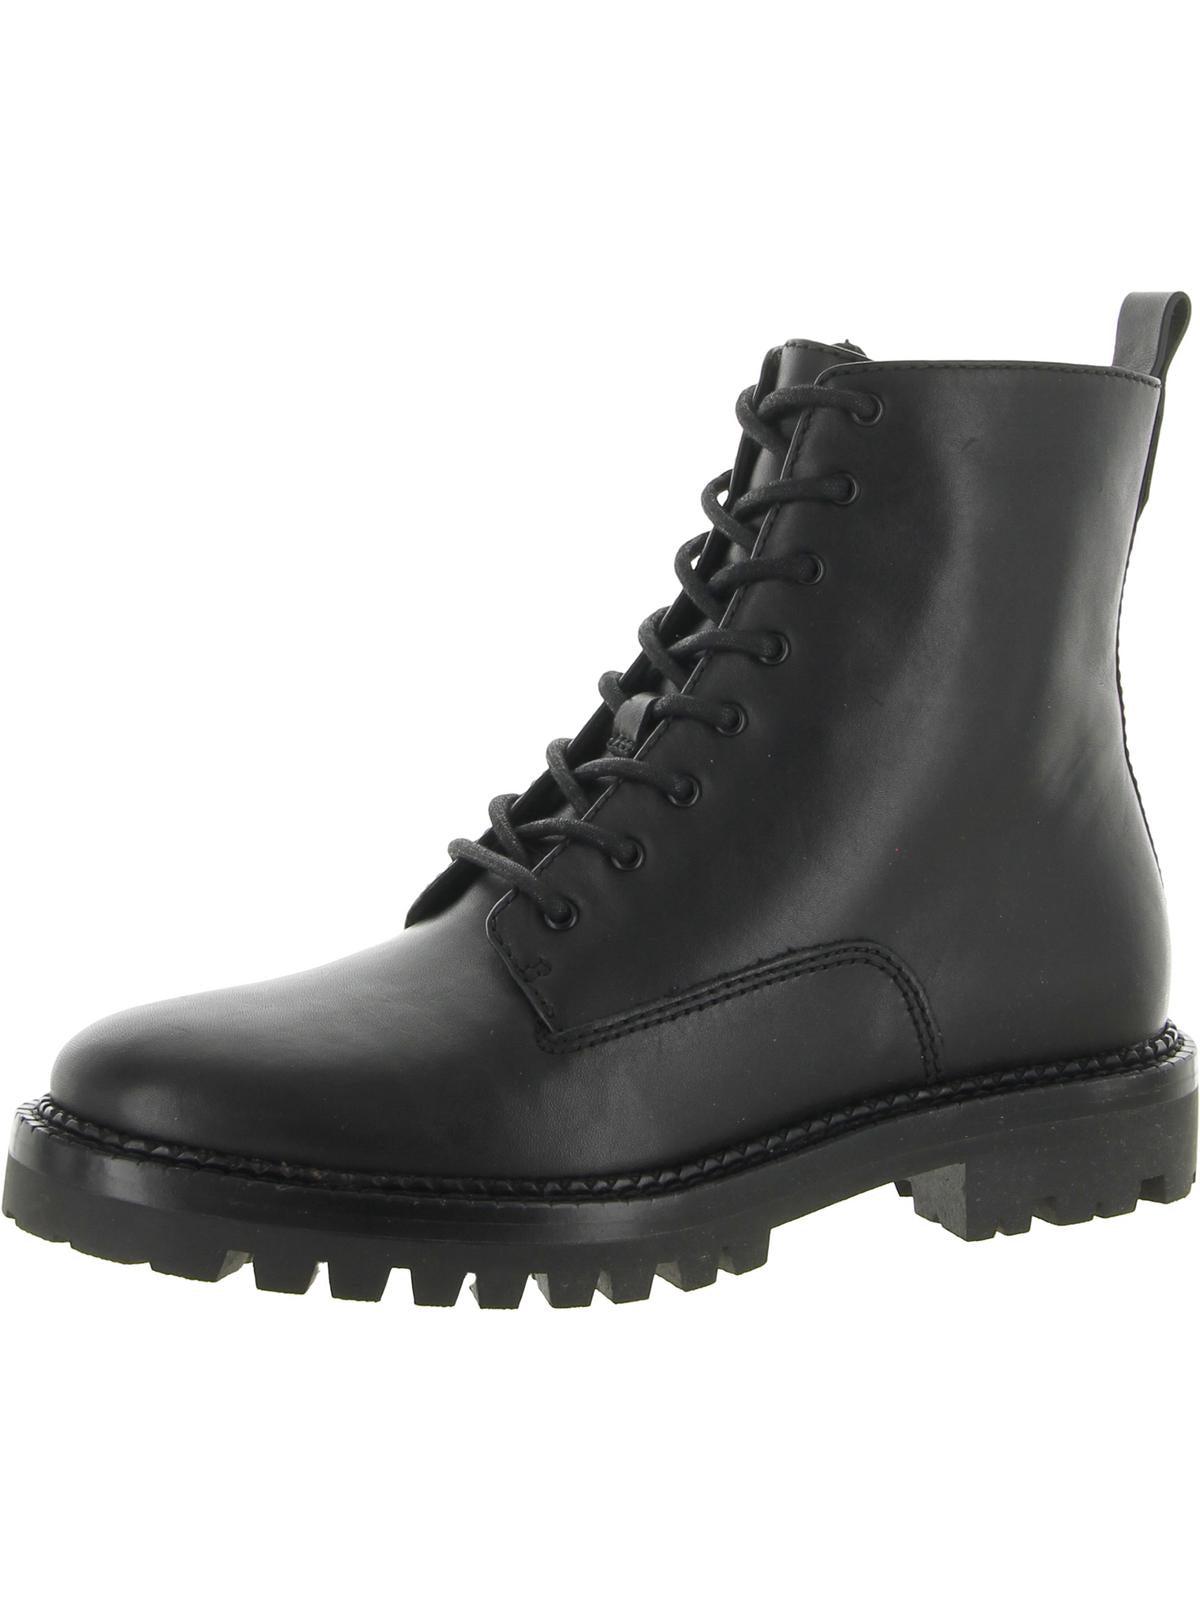 Vince Cabria Zipper Ankle Combat & Lace-up Boots in Black | Lyst